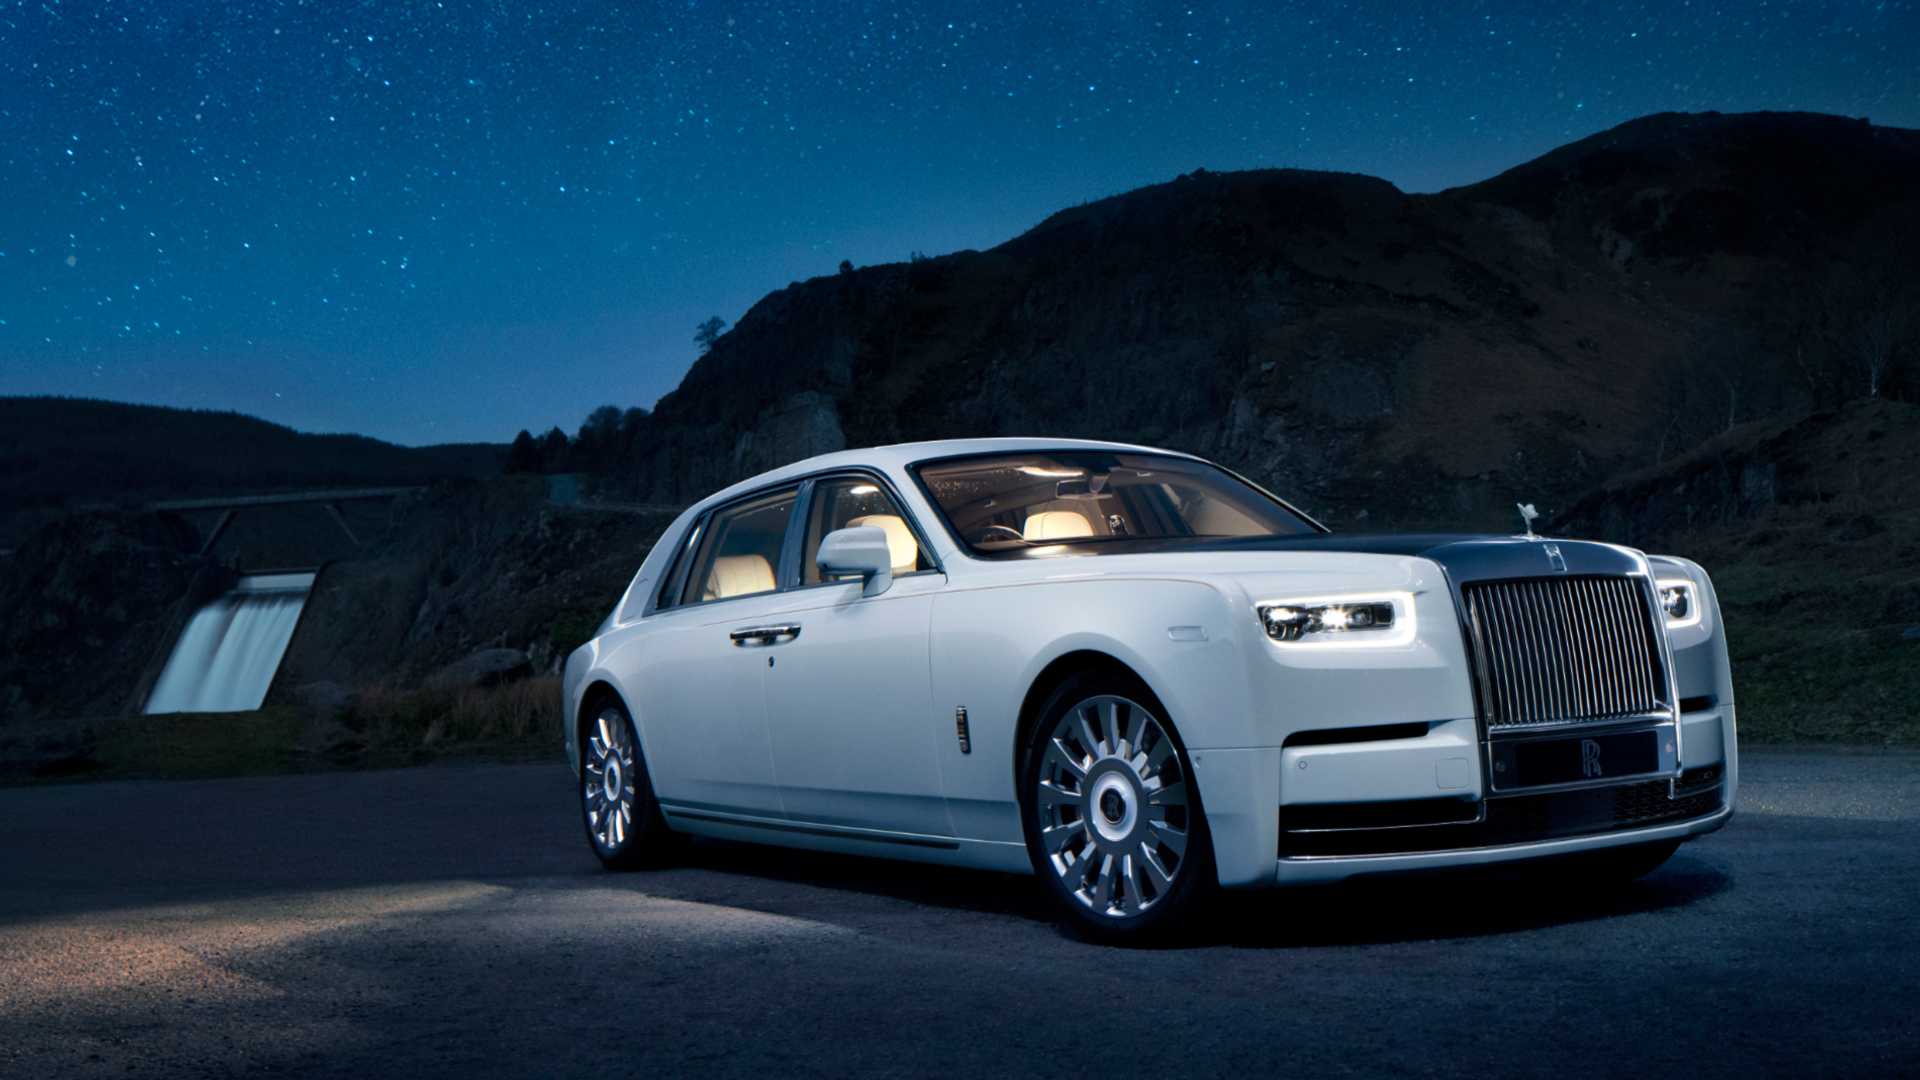 Top 7 Most Luxurious Cars Of 2022 - Looking For Your Next Ride?